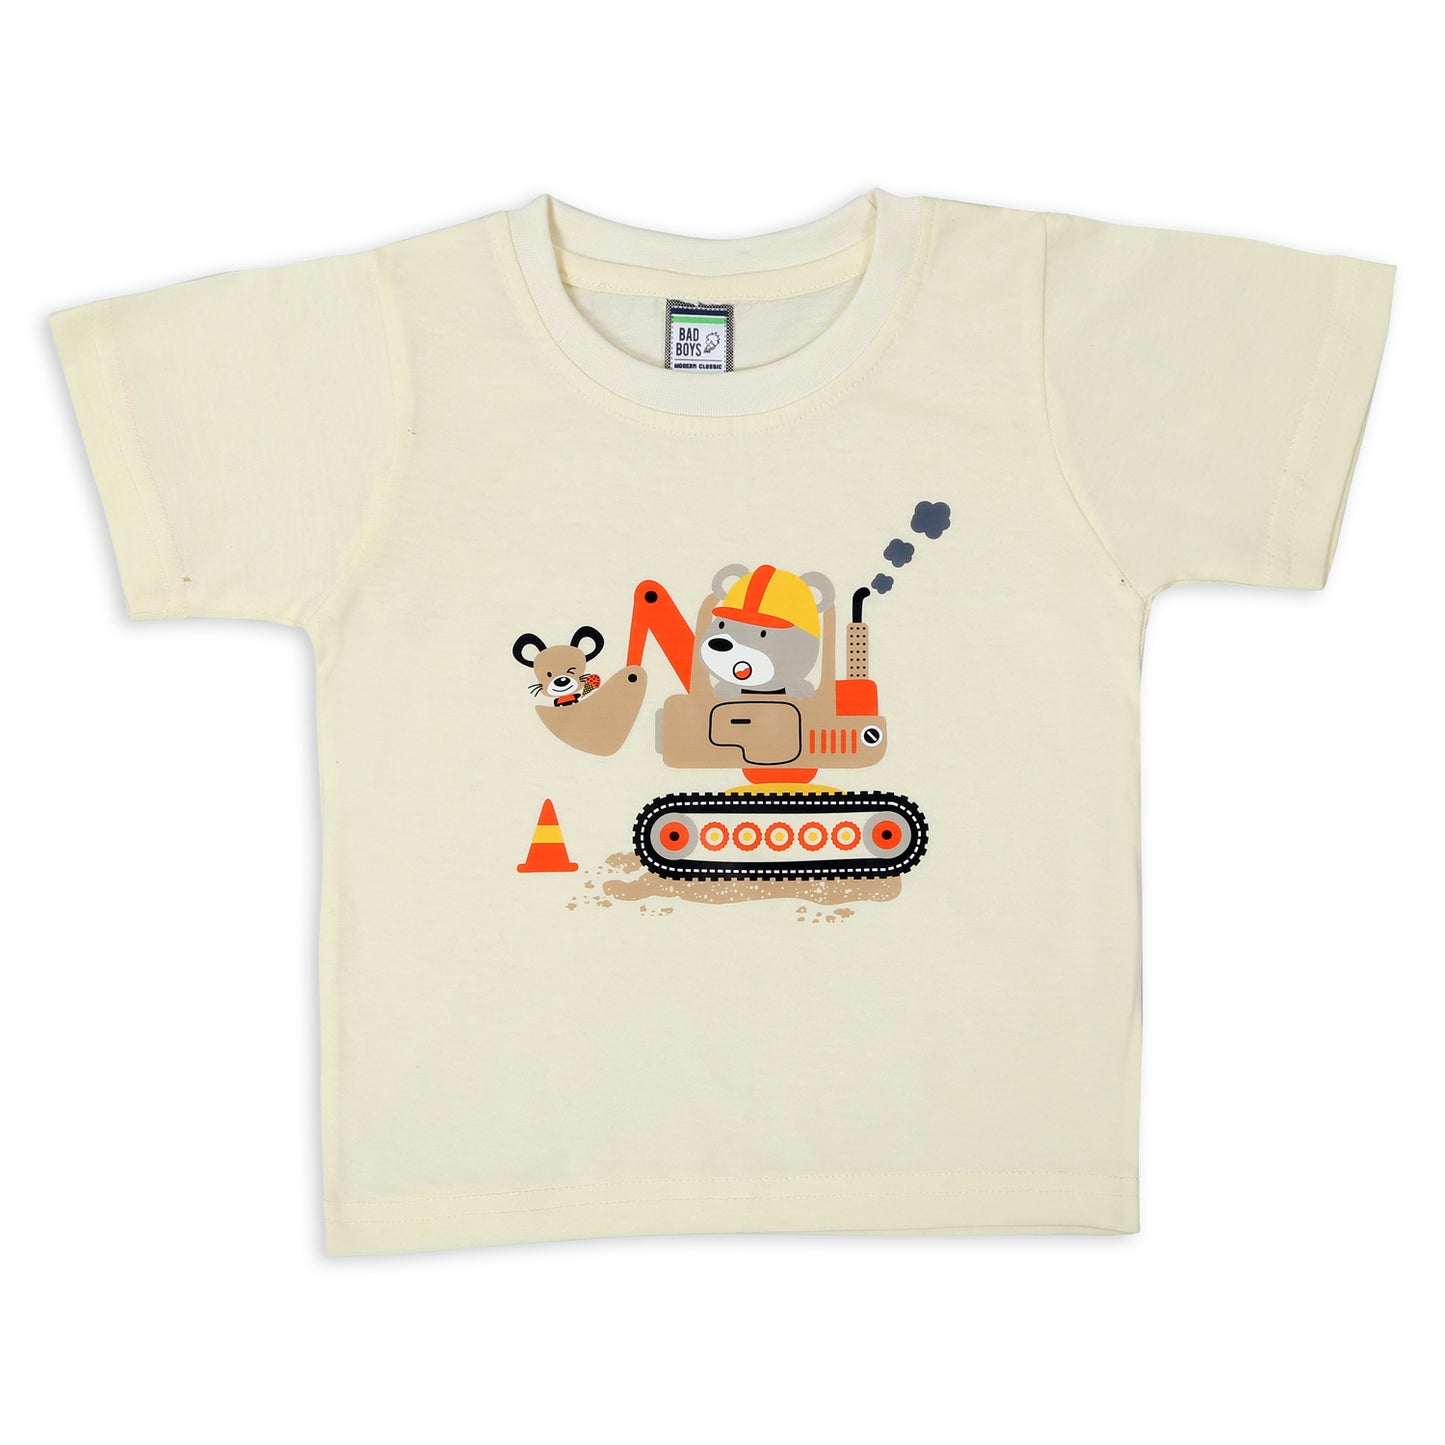 Adorable Adventures Await: 3-Piece Set for Tiny Trendsetting Tots!